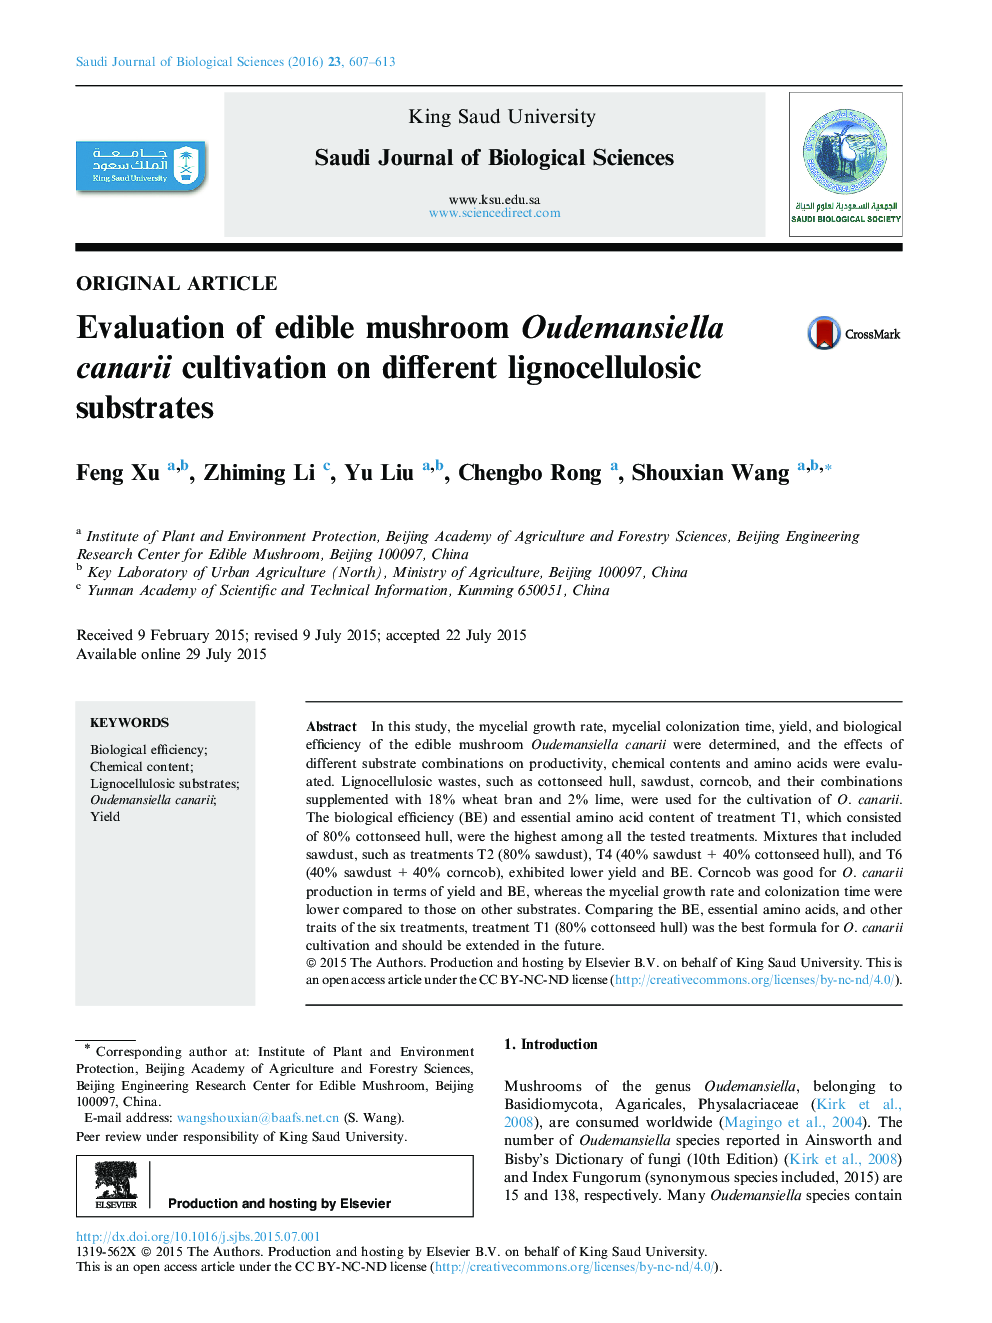 Evaluation of edible mushroom Oudemansiella canarii cultivation on different lignocellulosic substrates 